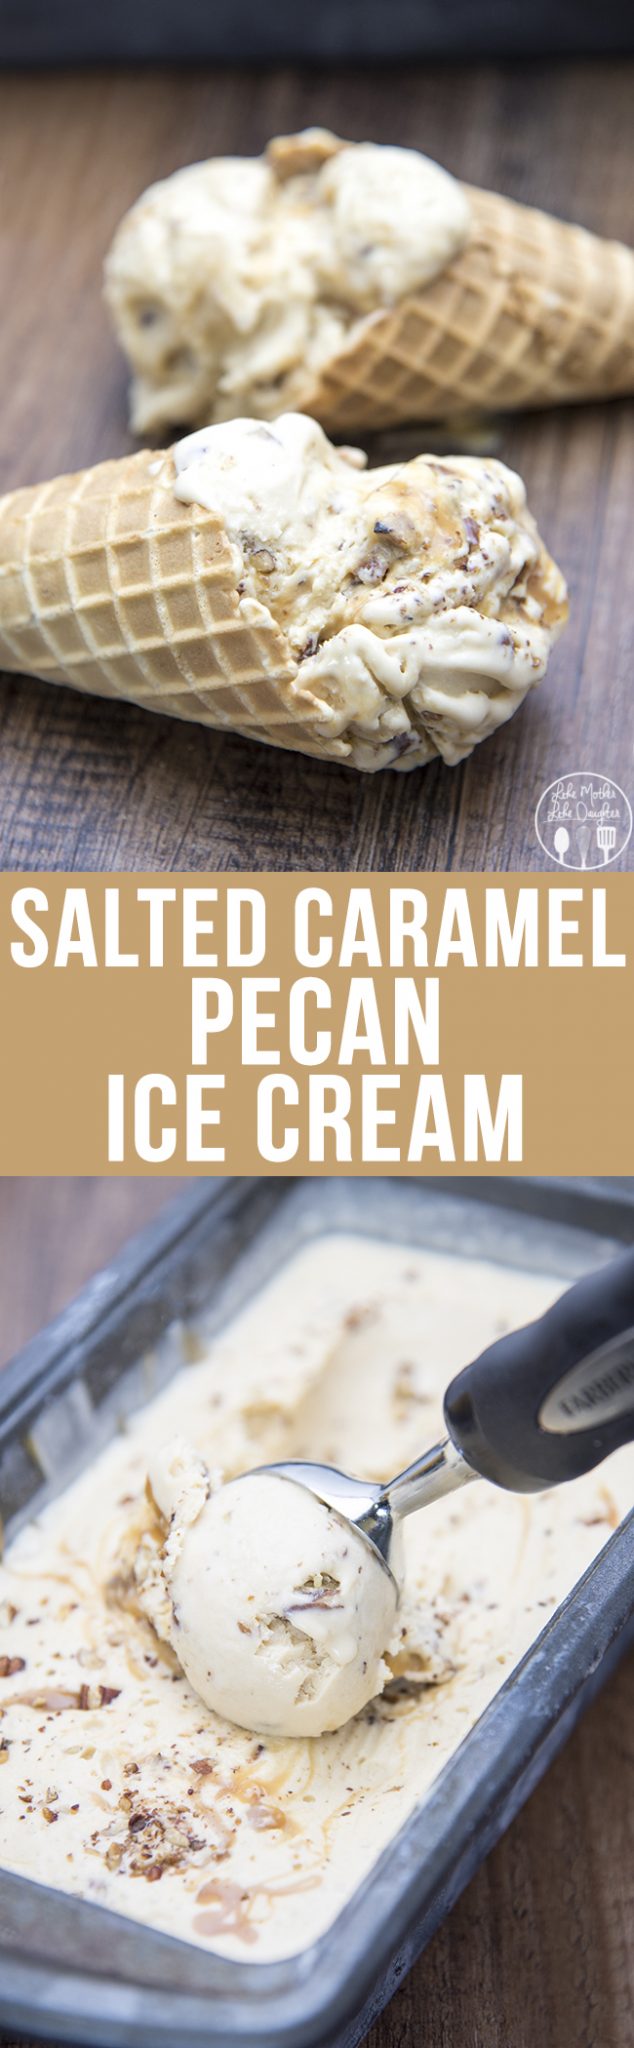 Title card for salted caramel pecan ice cream with text.